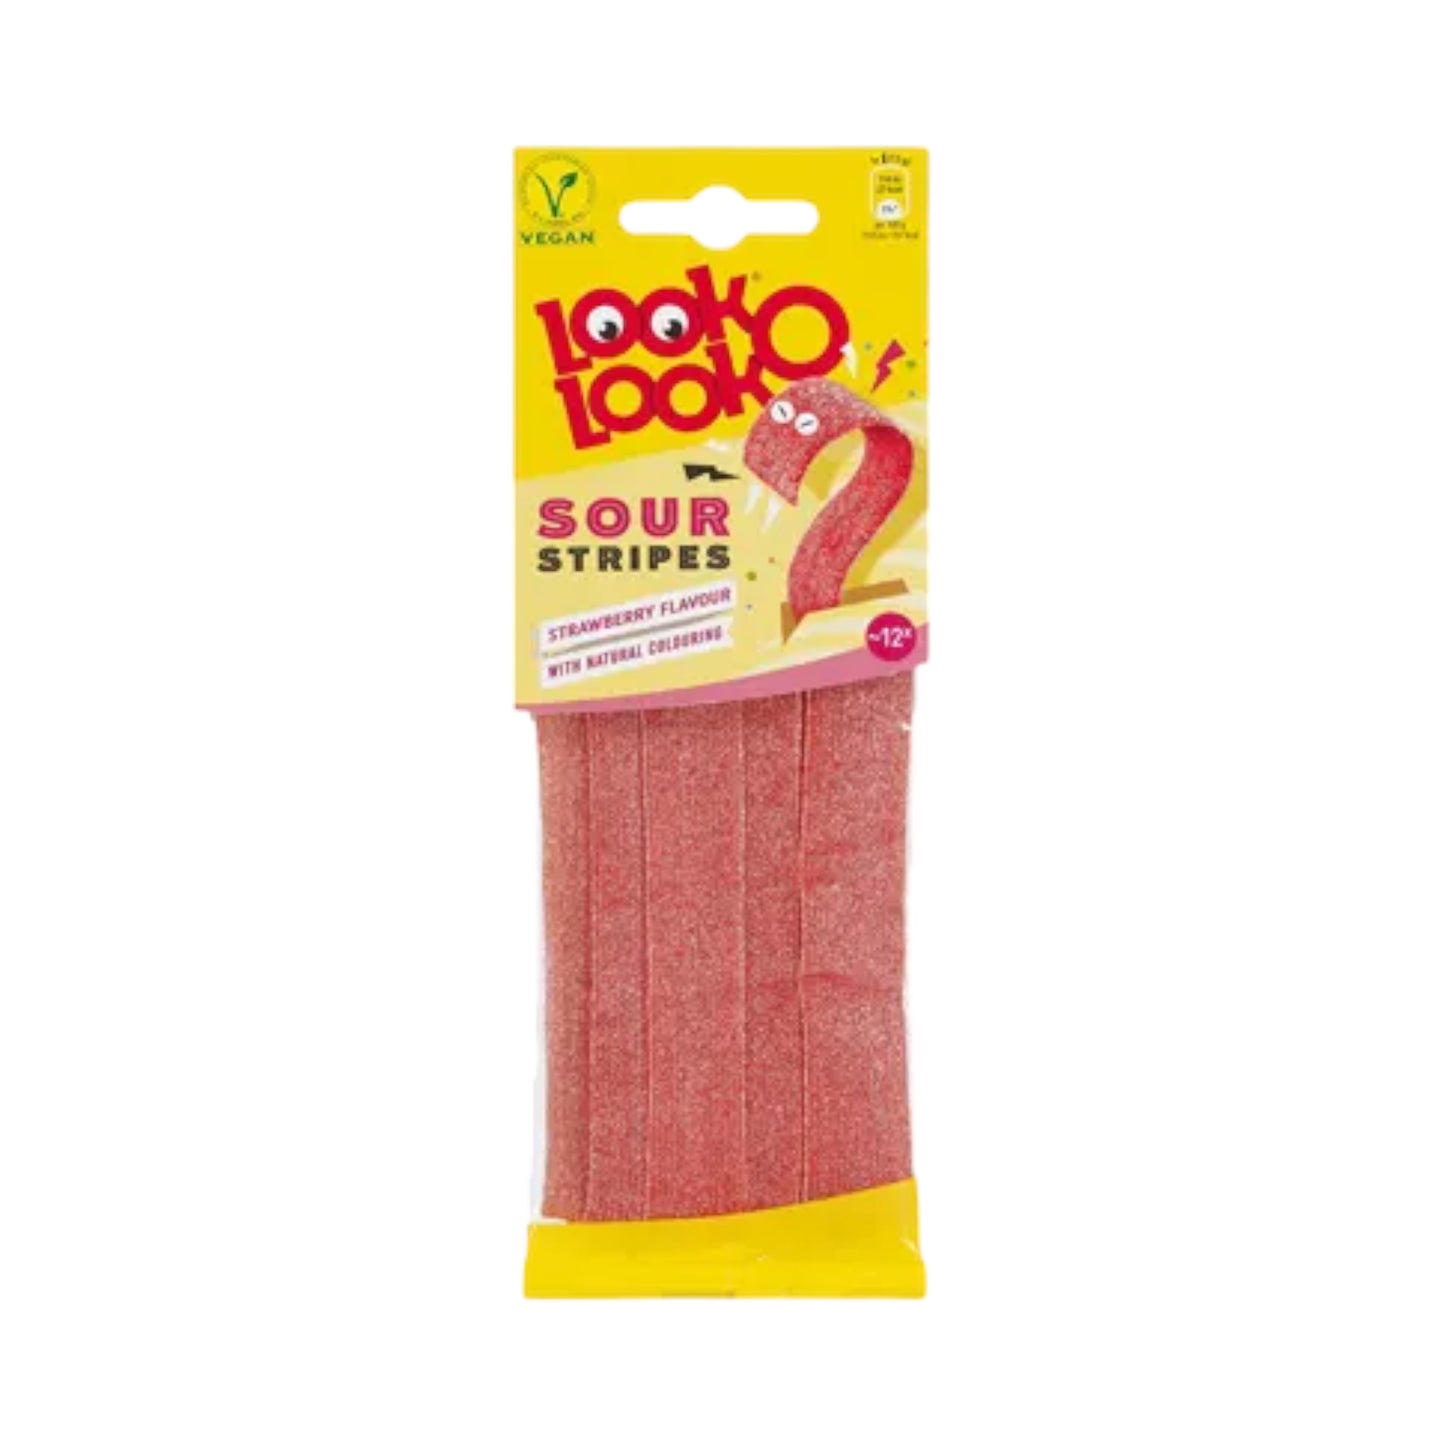 Look-O-Look Sour Stripes Strawberry - 90g